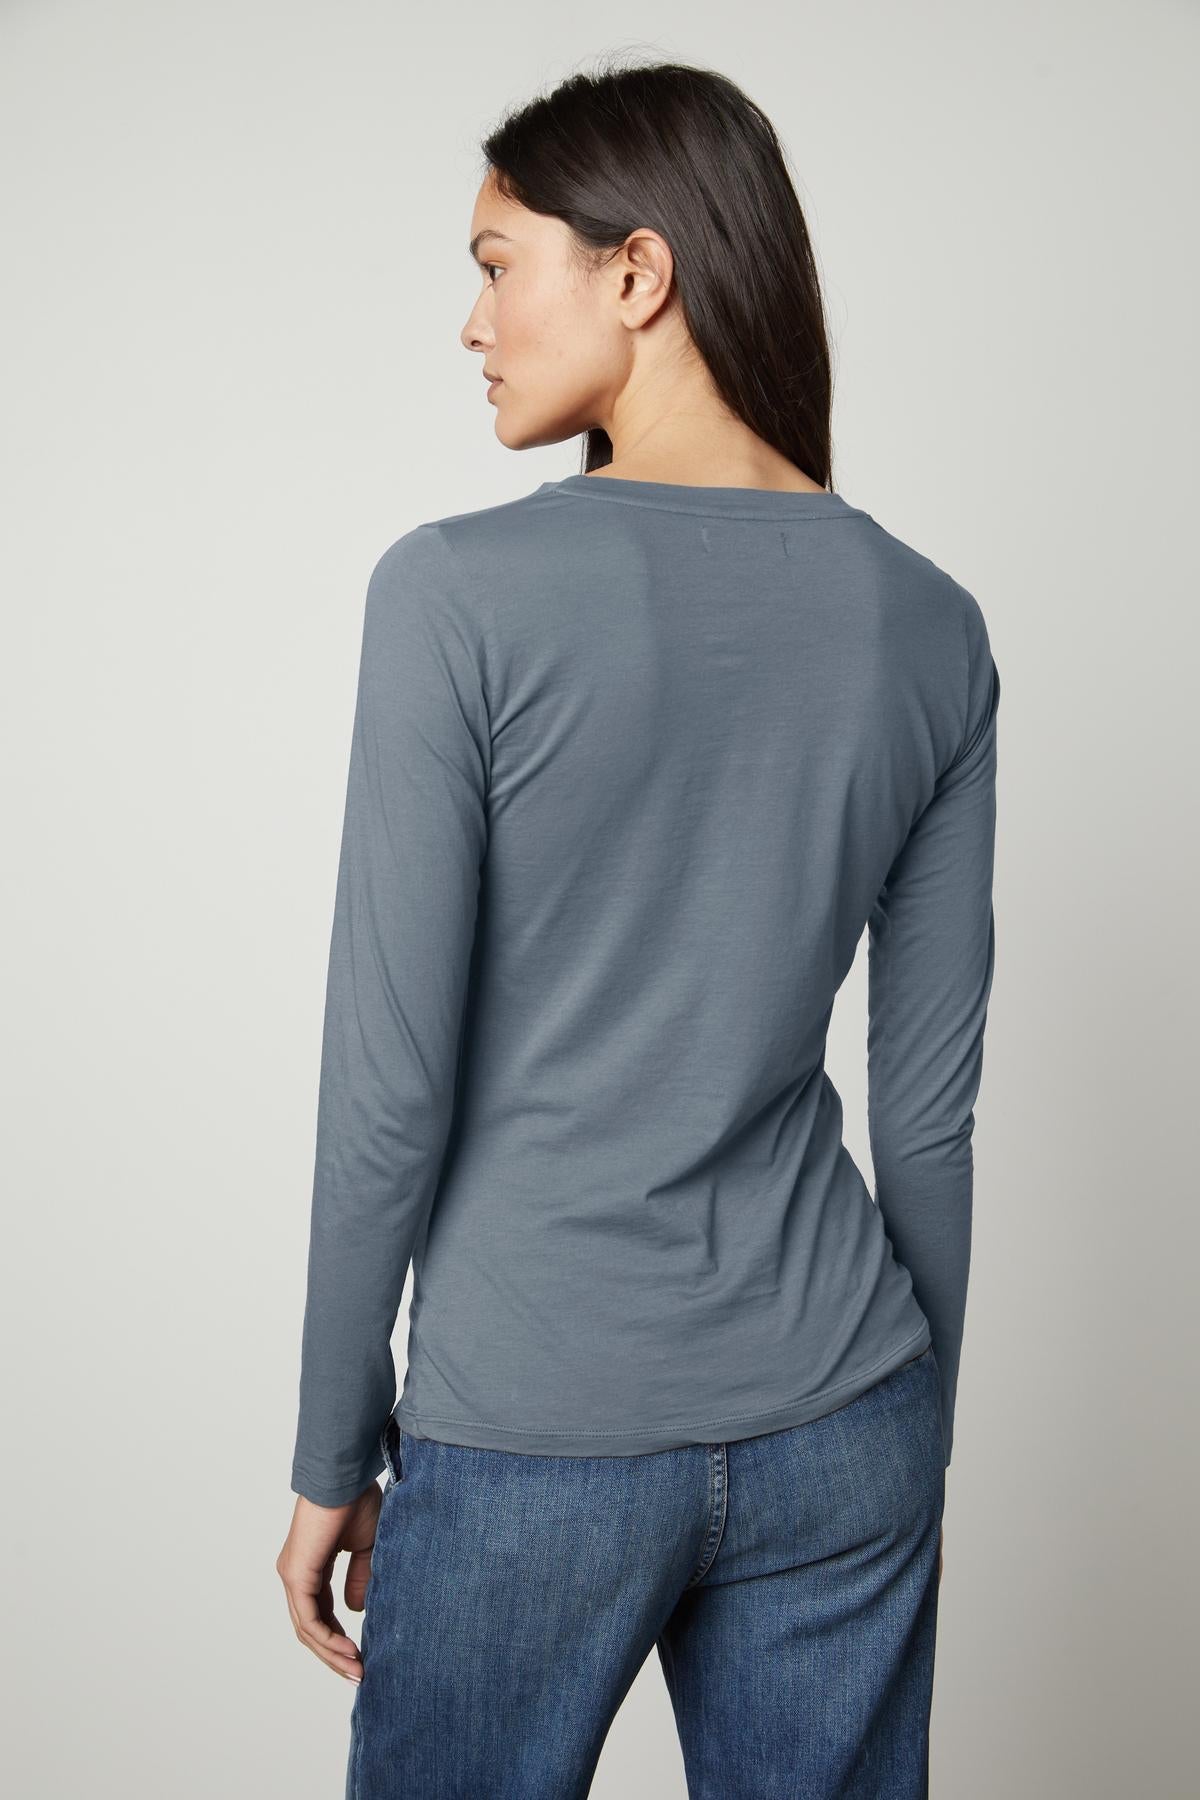 The back view of a woman wearing a Velvet by Graham & Spencer ZOFINA GAUZY WHISPER FITTED CREW NECK TEE.-35783262273729